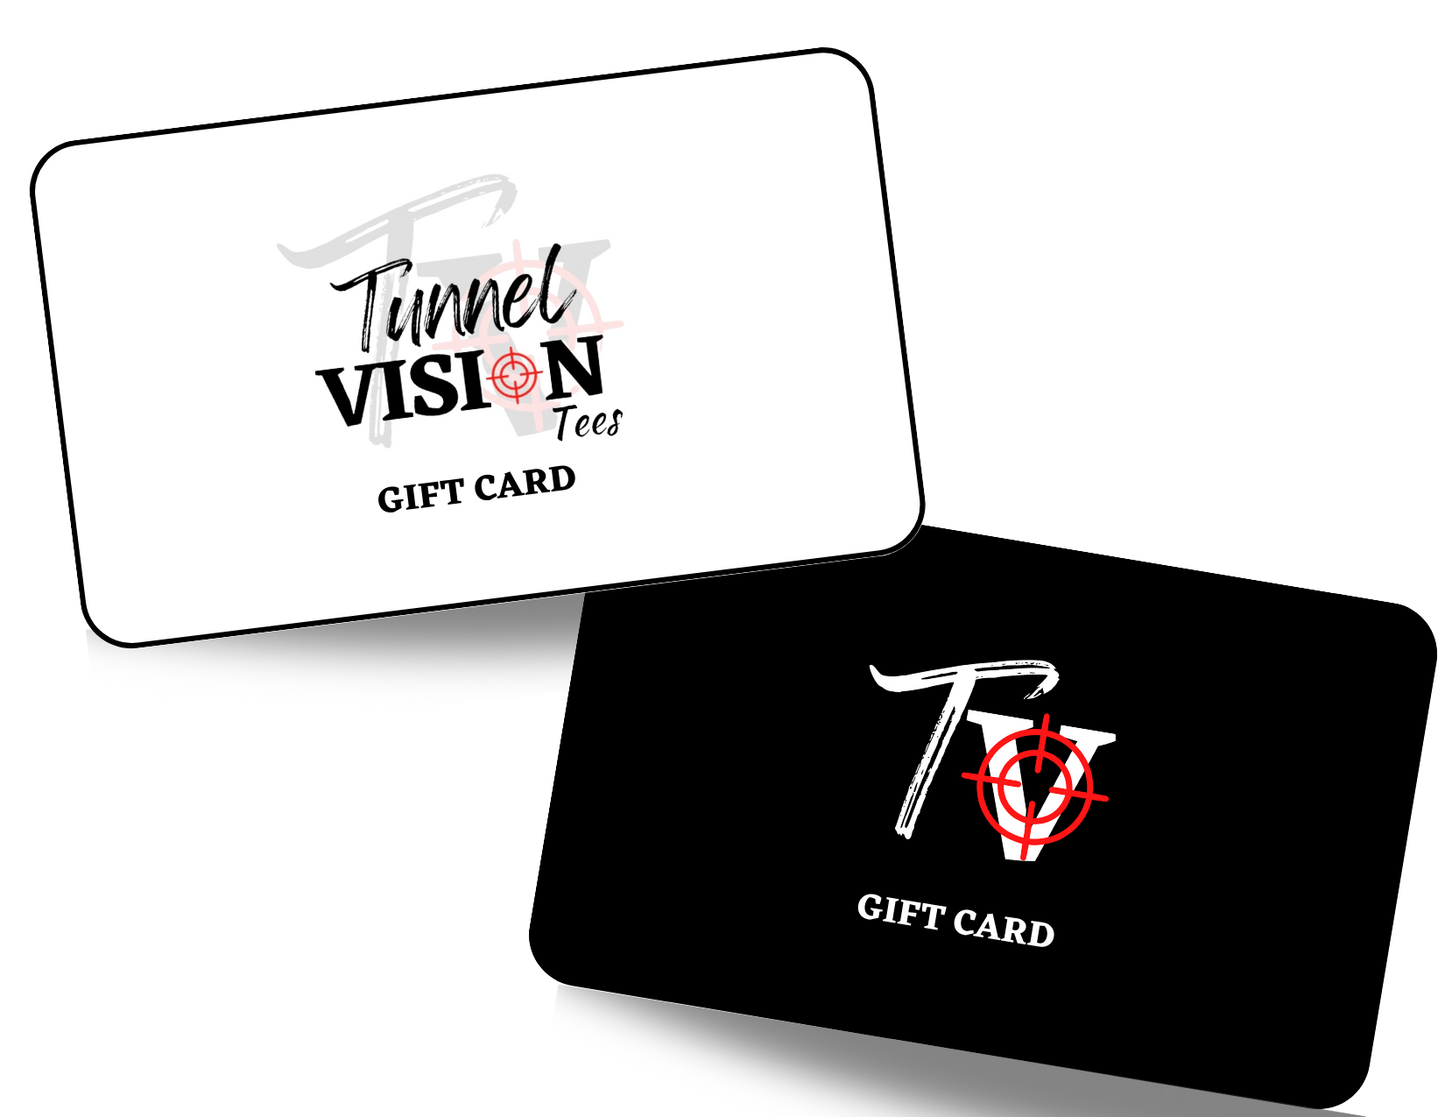 Tunnel Vision Tees Gift Card - Tunnel Vision Tees